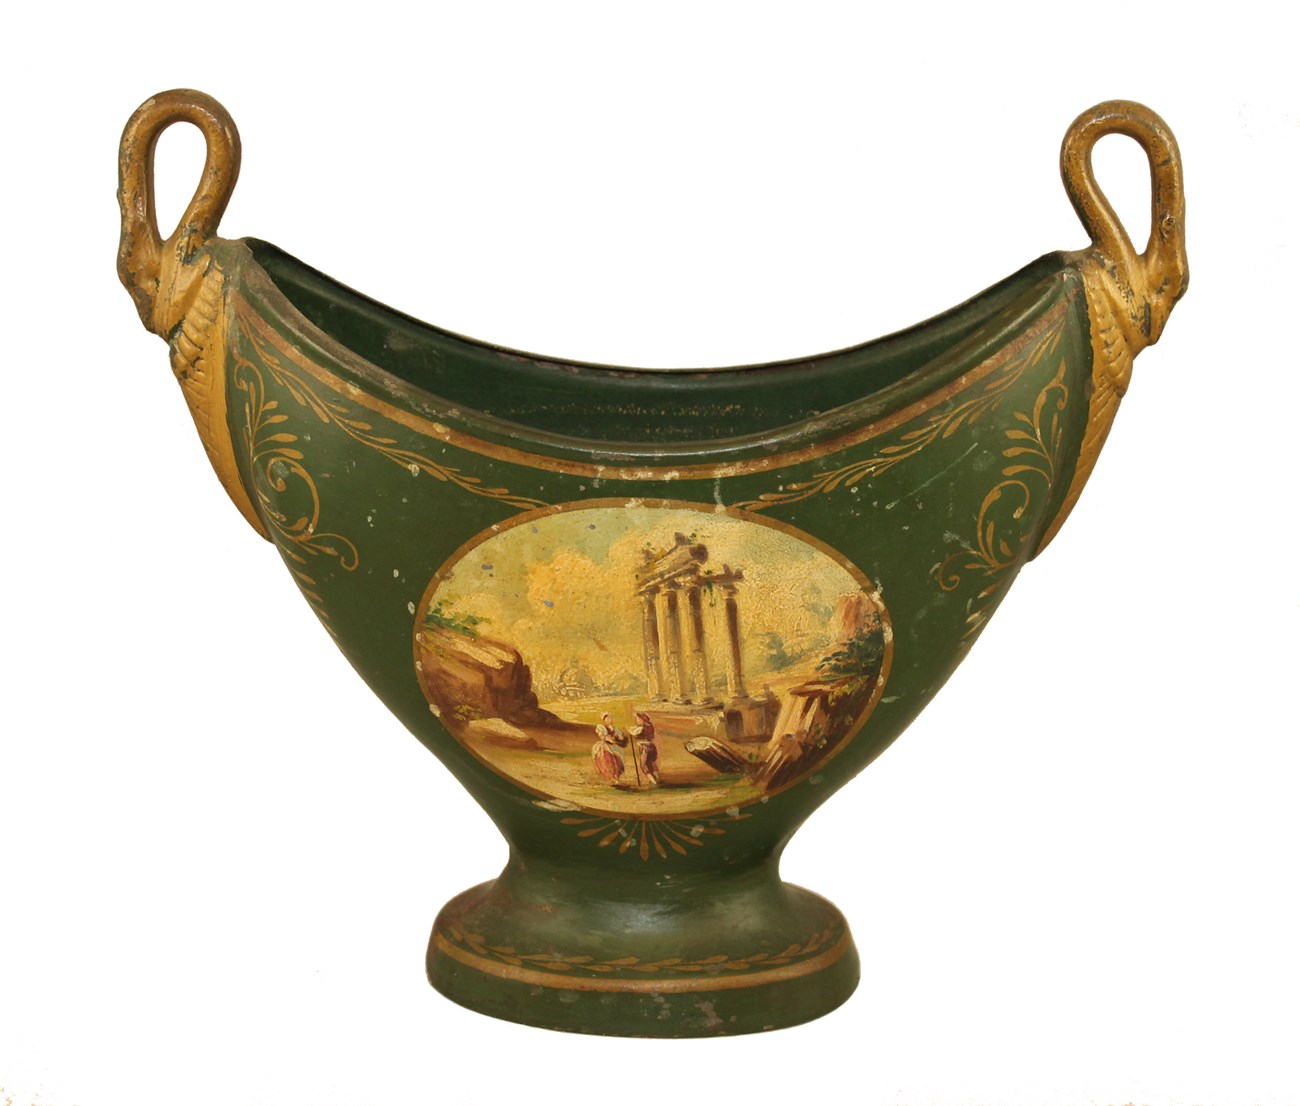 Green metal urn with wide flare, gold handles, and painted scene on side